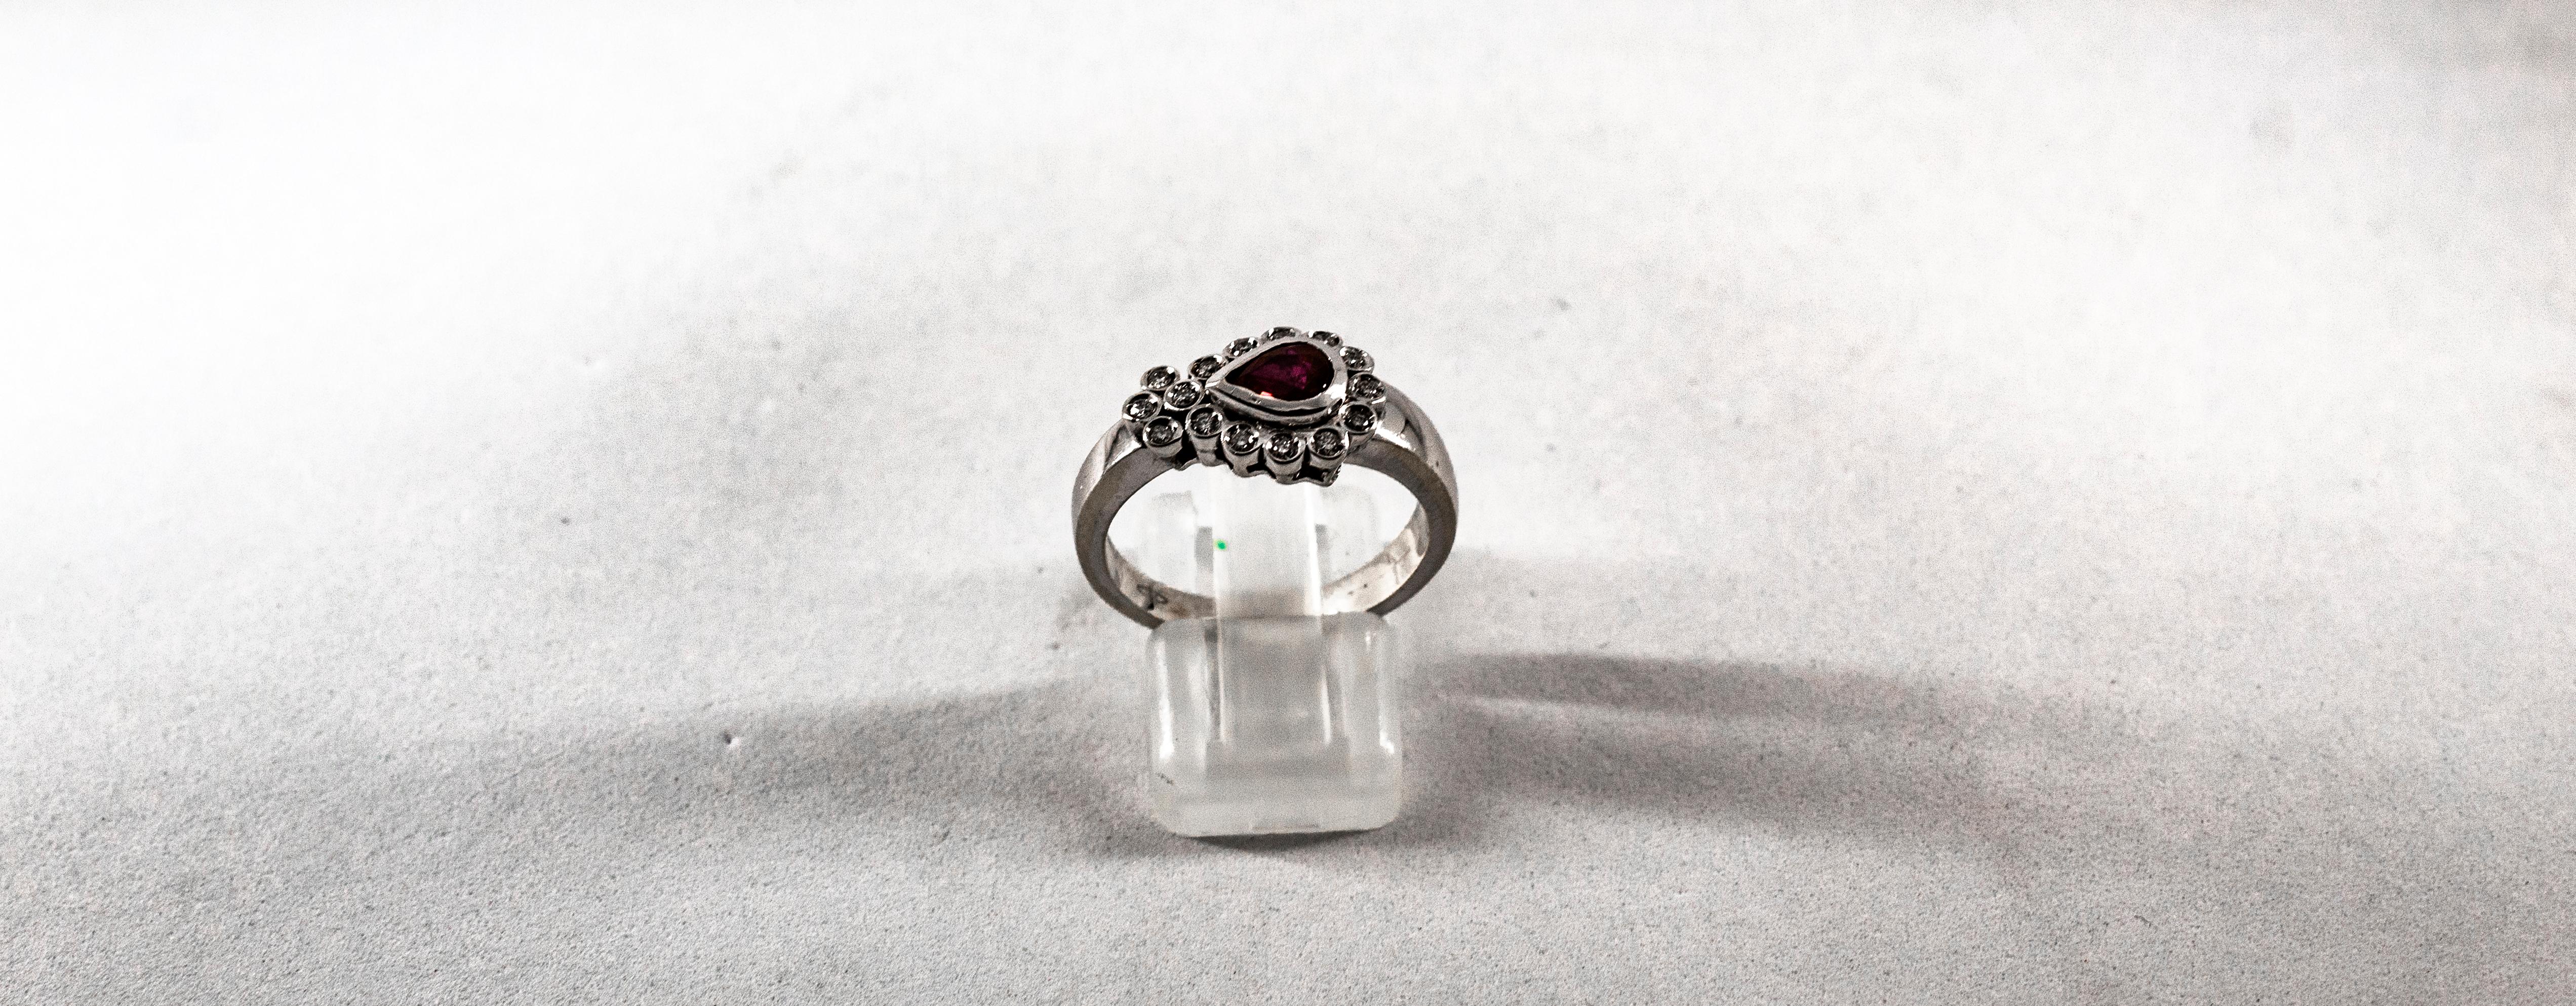 This Ring is made of 18K White Gold.
This Ring has 0.28 Carats of White Modern Round Cut Diamonds.
This Ring has a 0.60 Carats Pear Cut Ruby.
Size ITA: 17 USA: 8

We're a workshop so every piece is handmade, customizable and resizable.